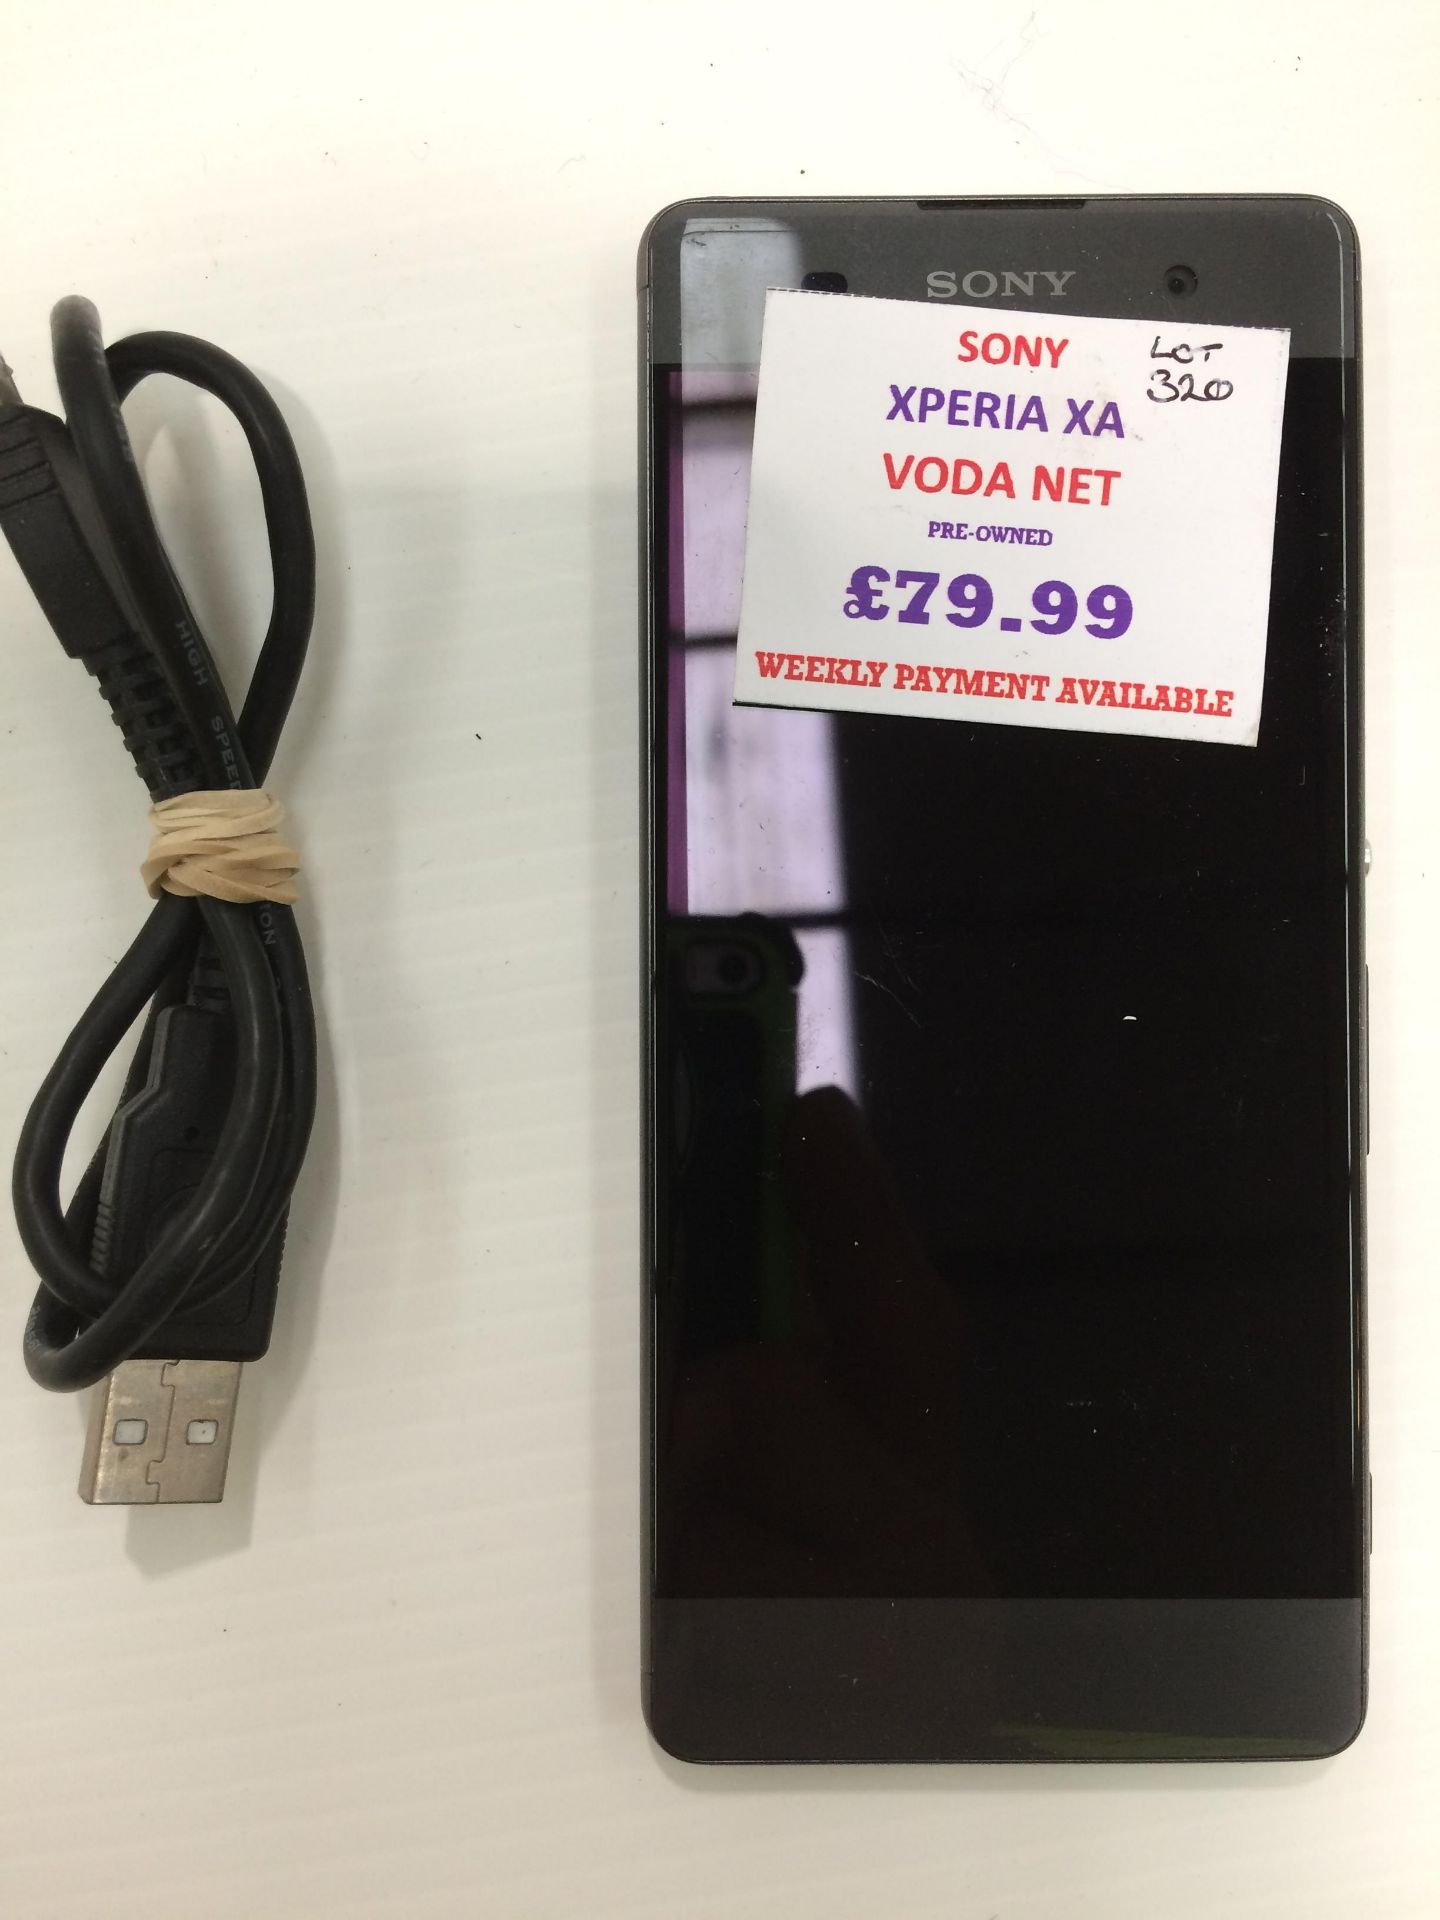 Sony Xperia XA mobile phone (Vodafone network, pre-owned, £79.99) complete with power lead.